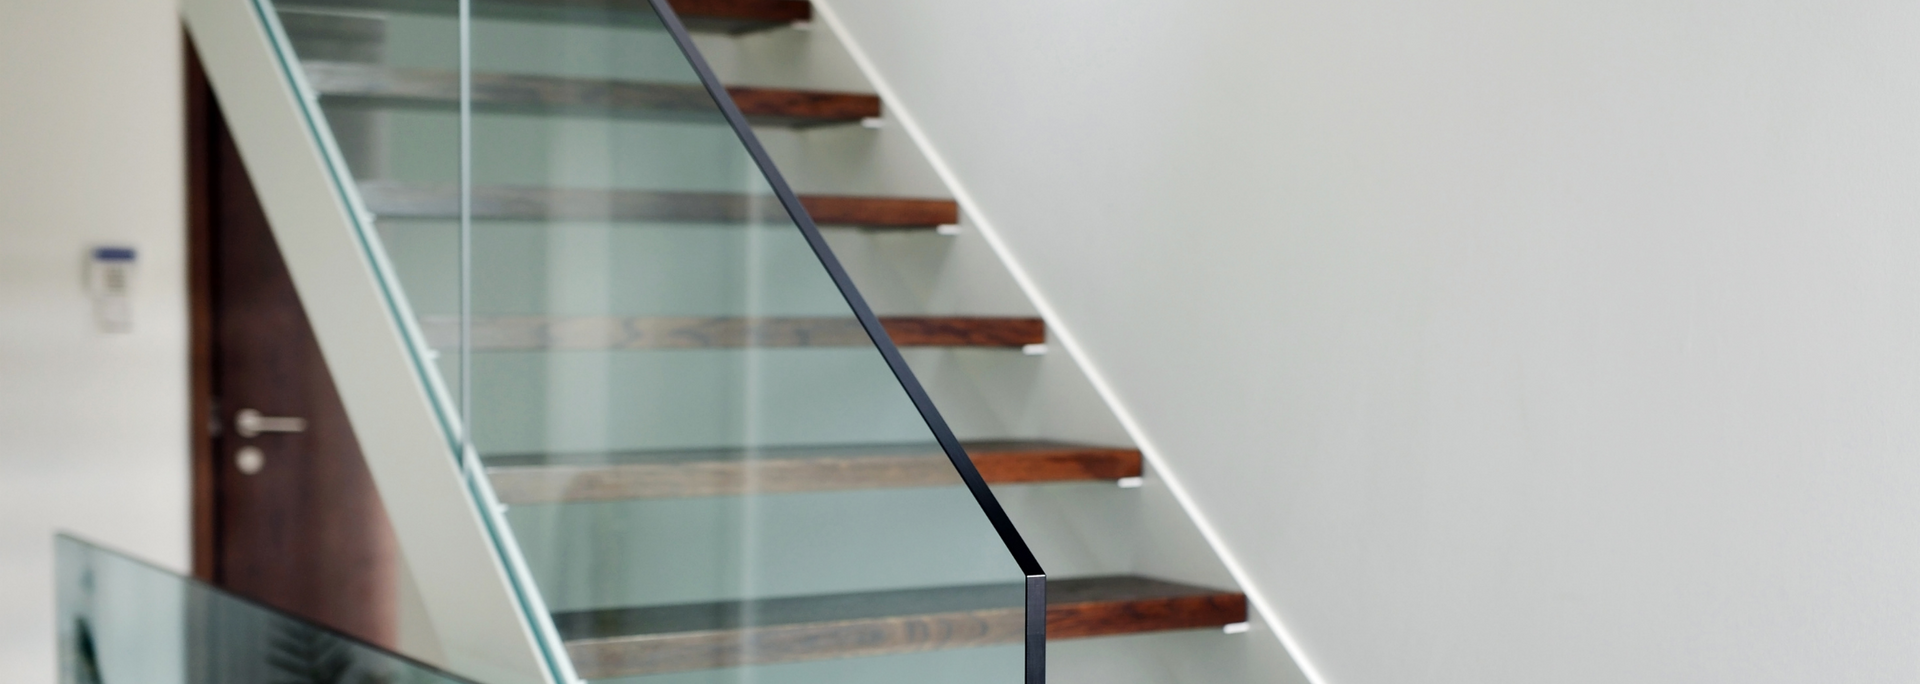 Picture of a glass railing on a residential staircase